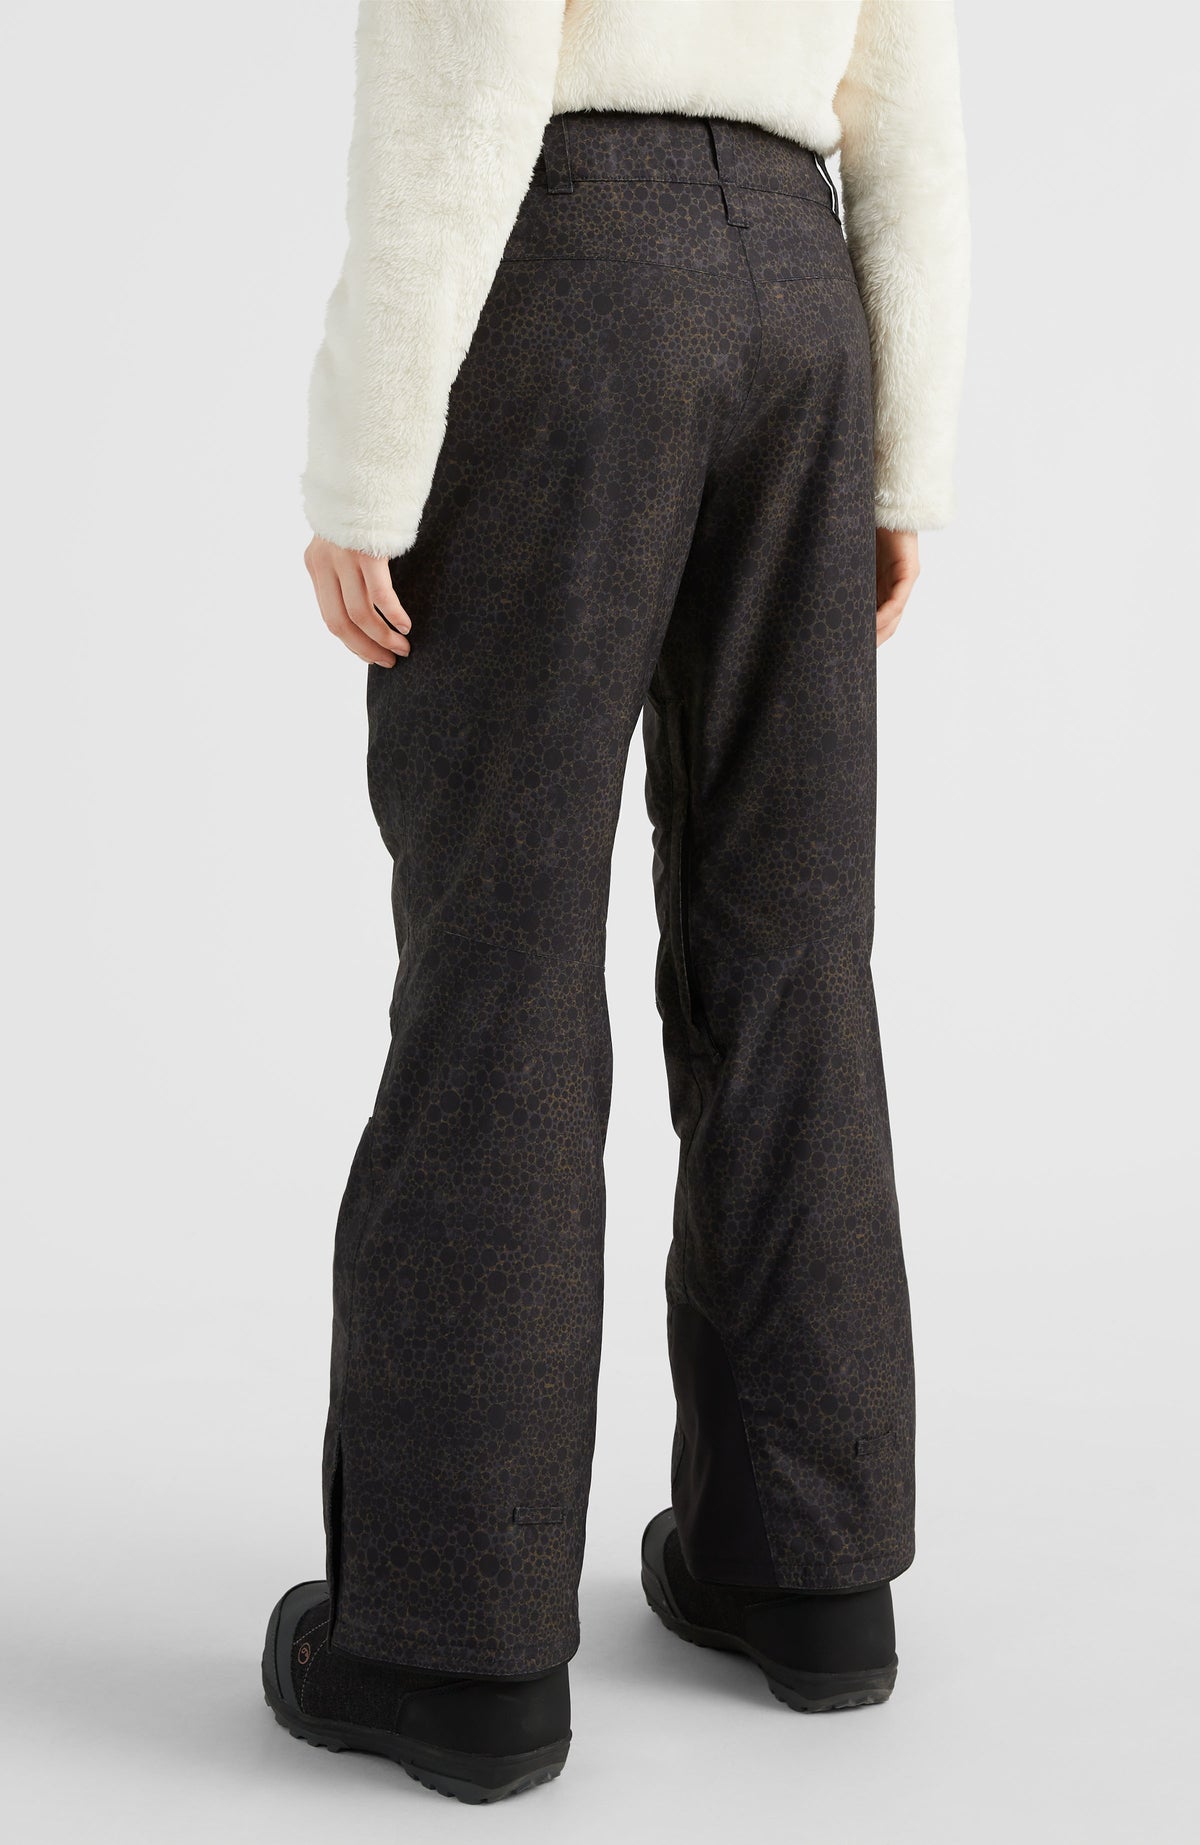 GLAMOUR INSULATED PANTS – O'NEILL